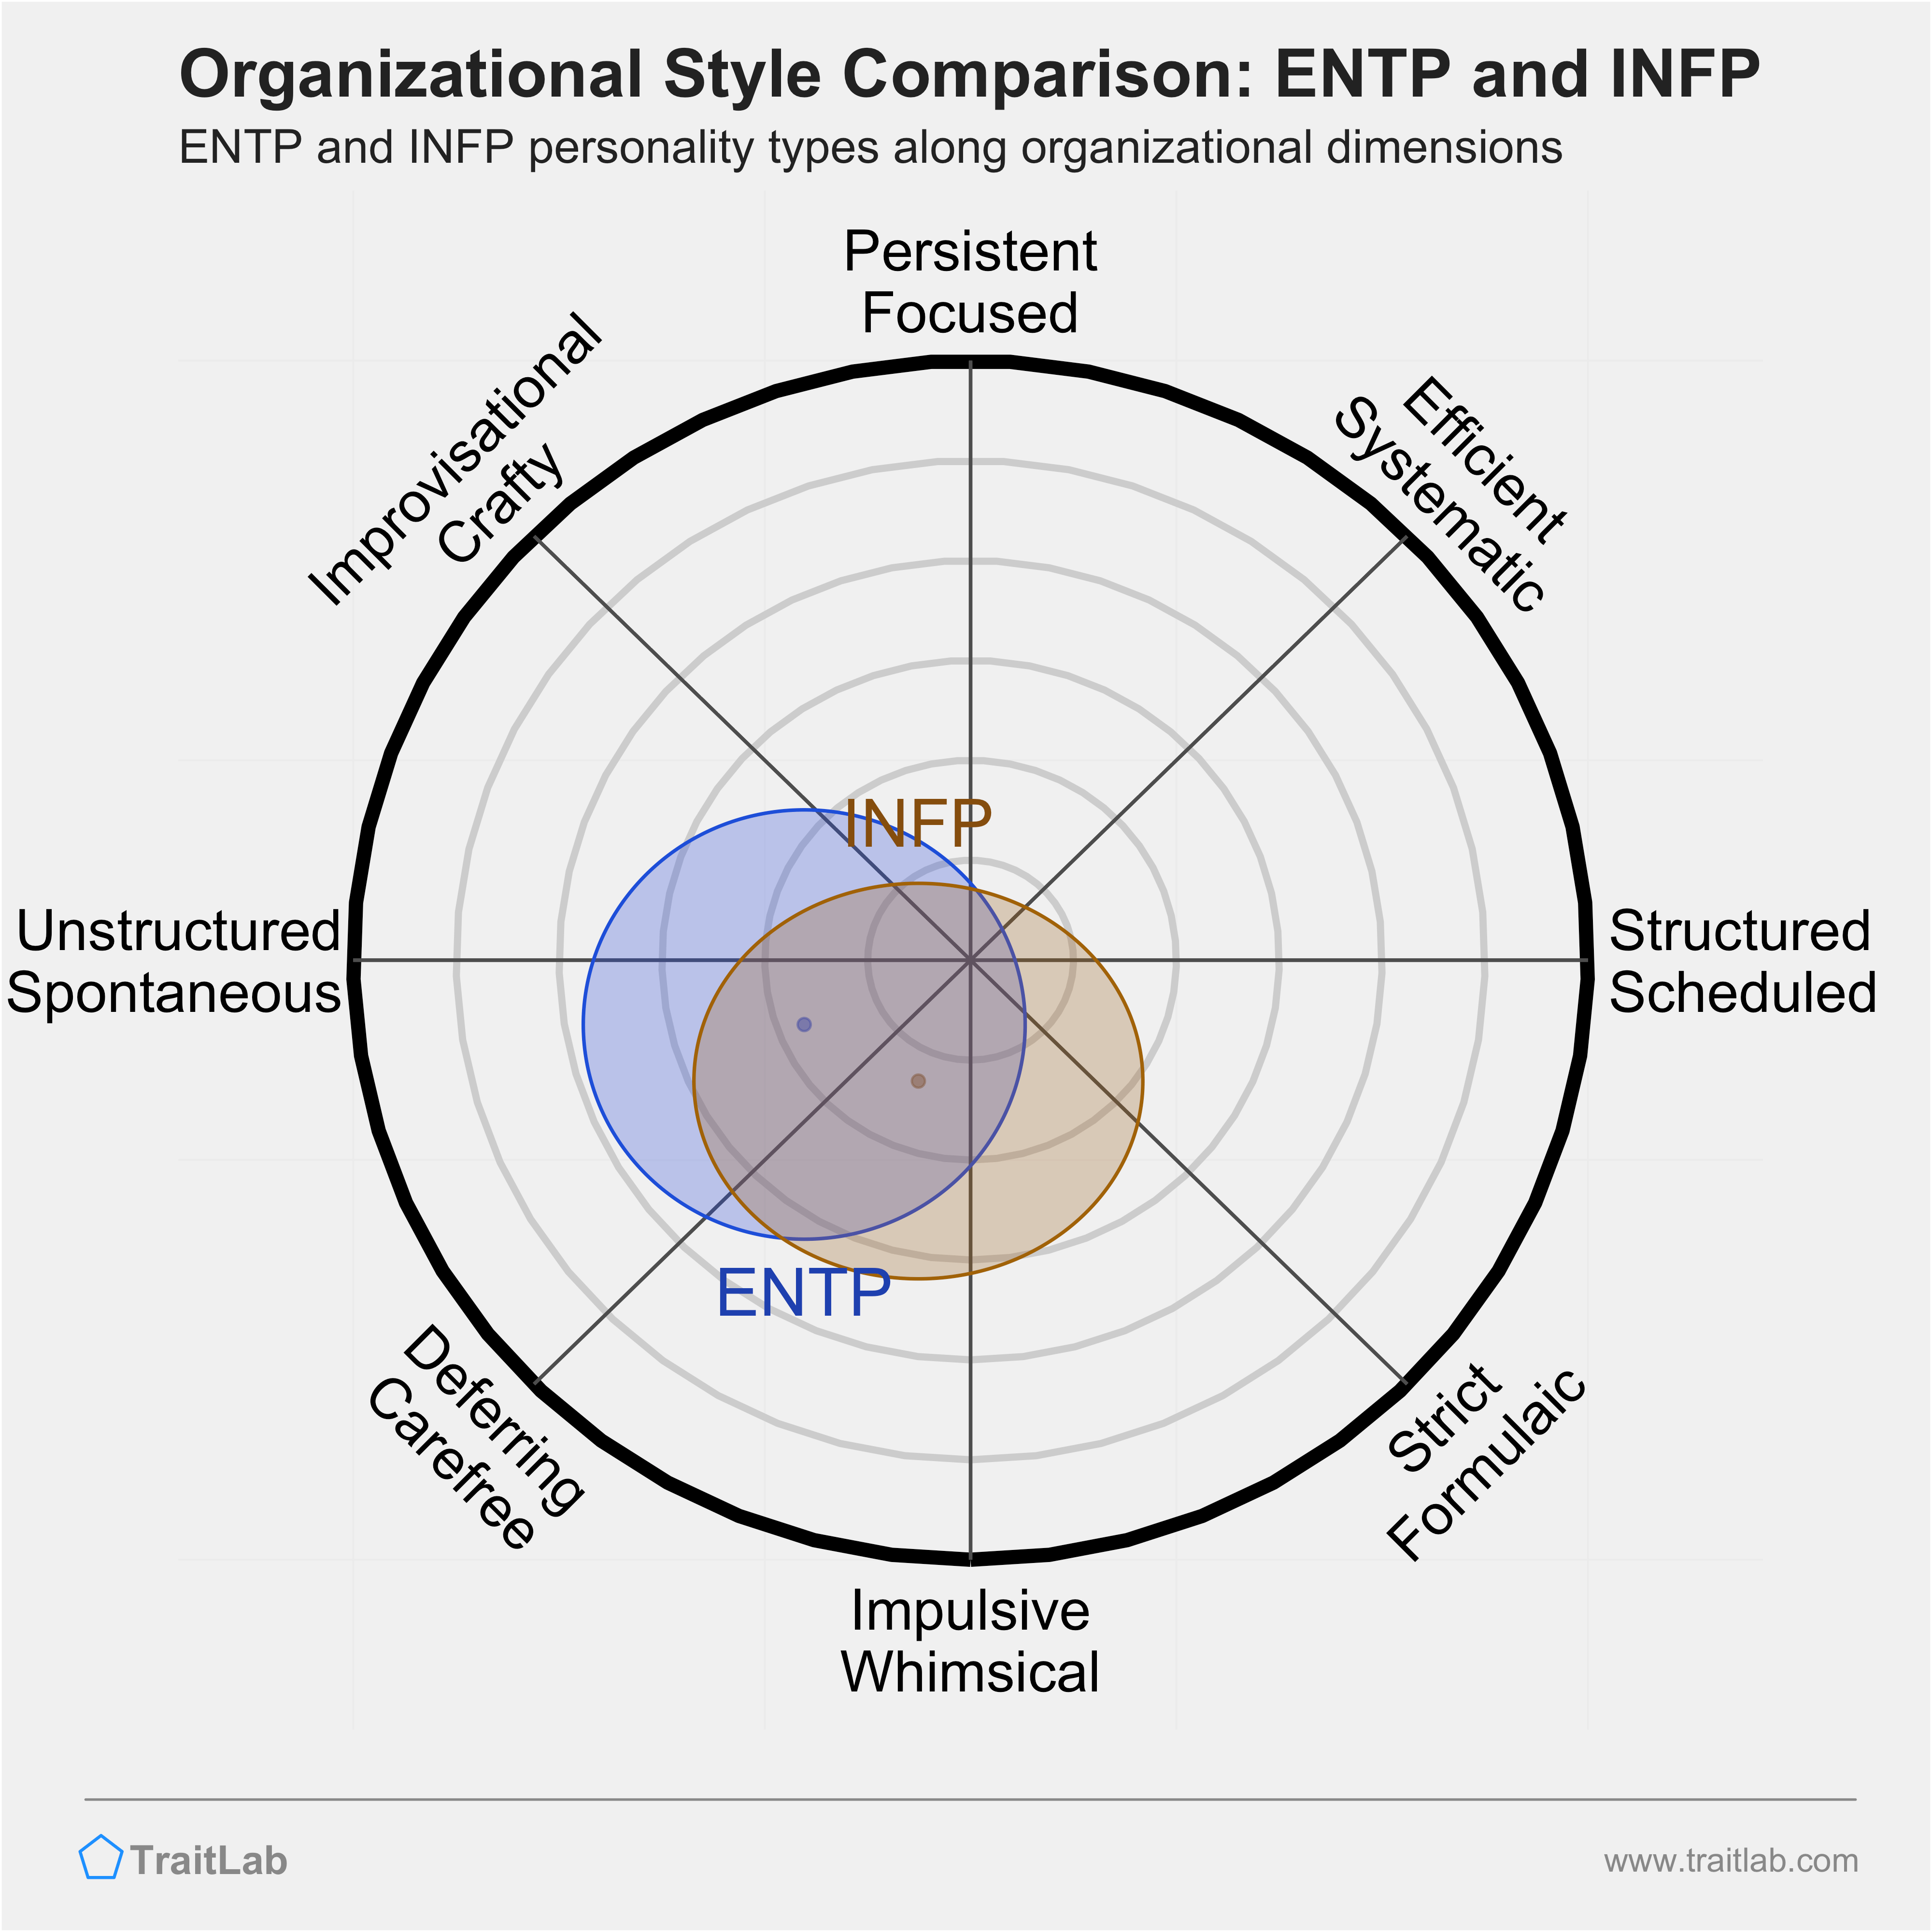 ENTP and INFP comparison across organizational dimensions